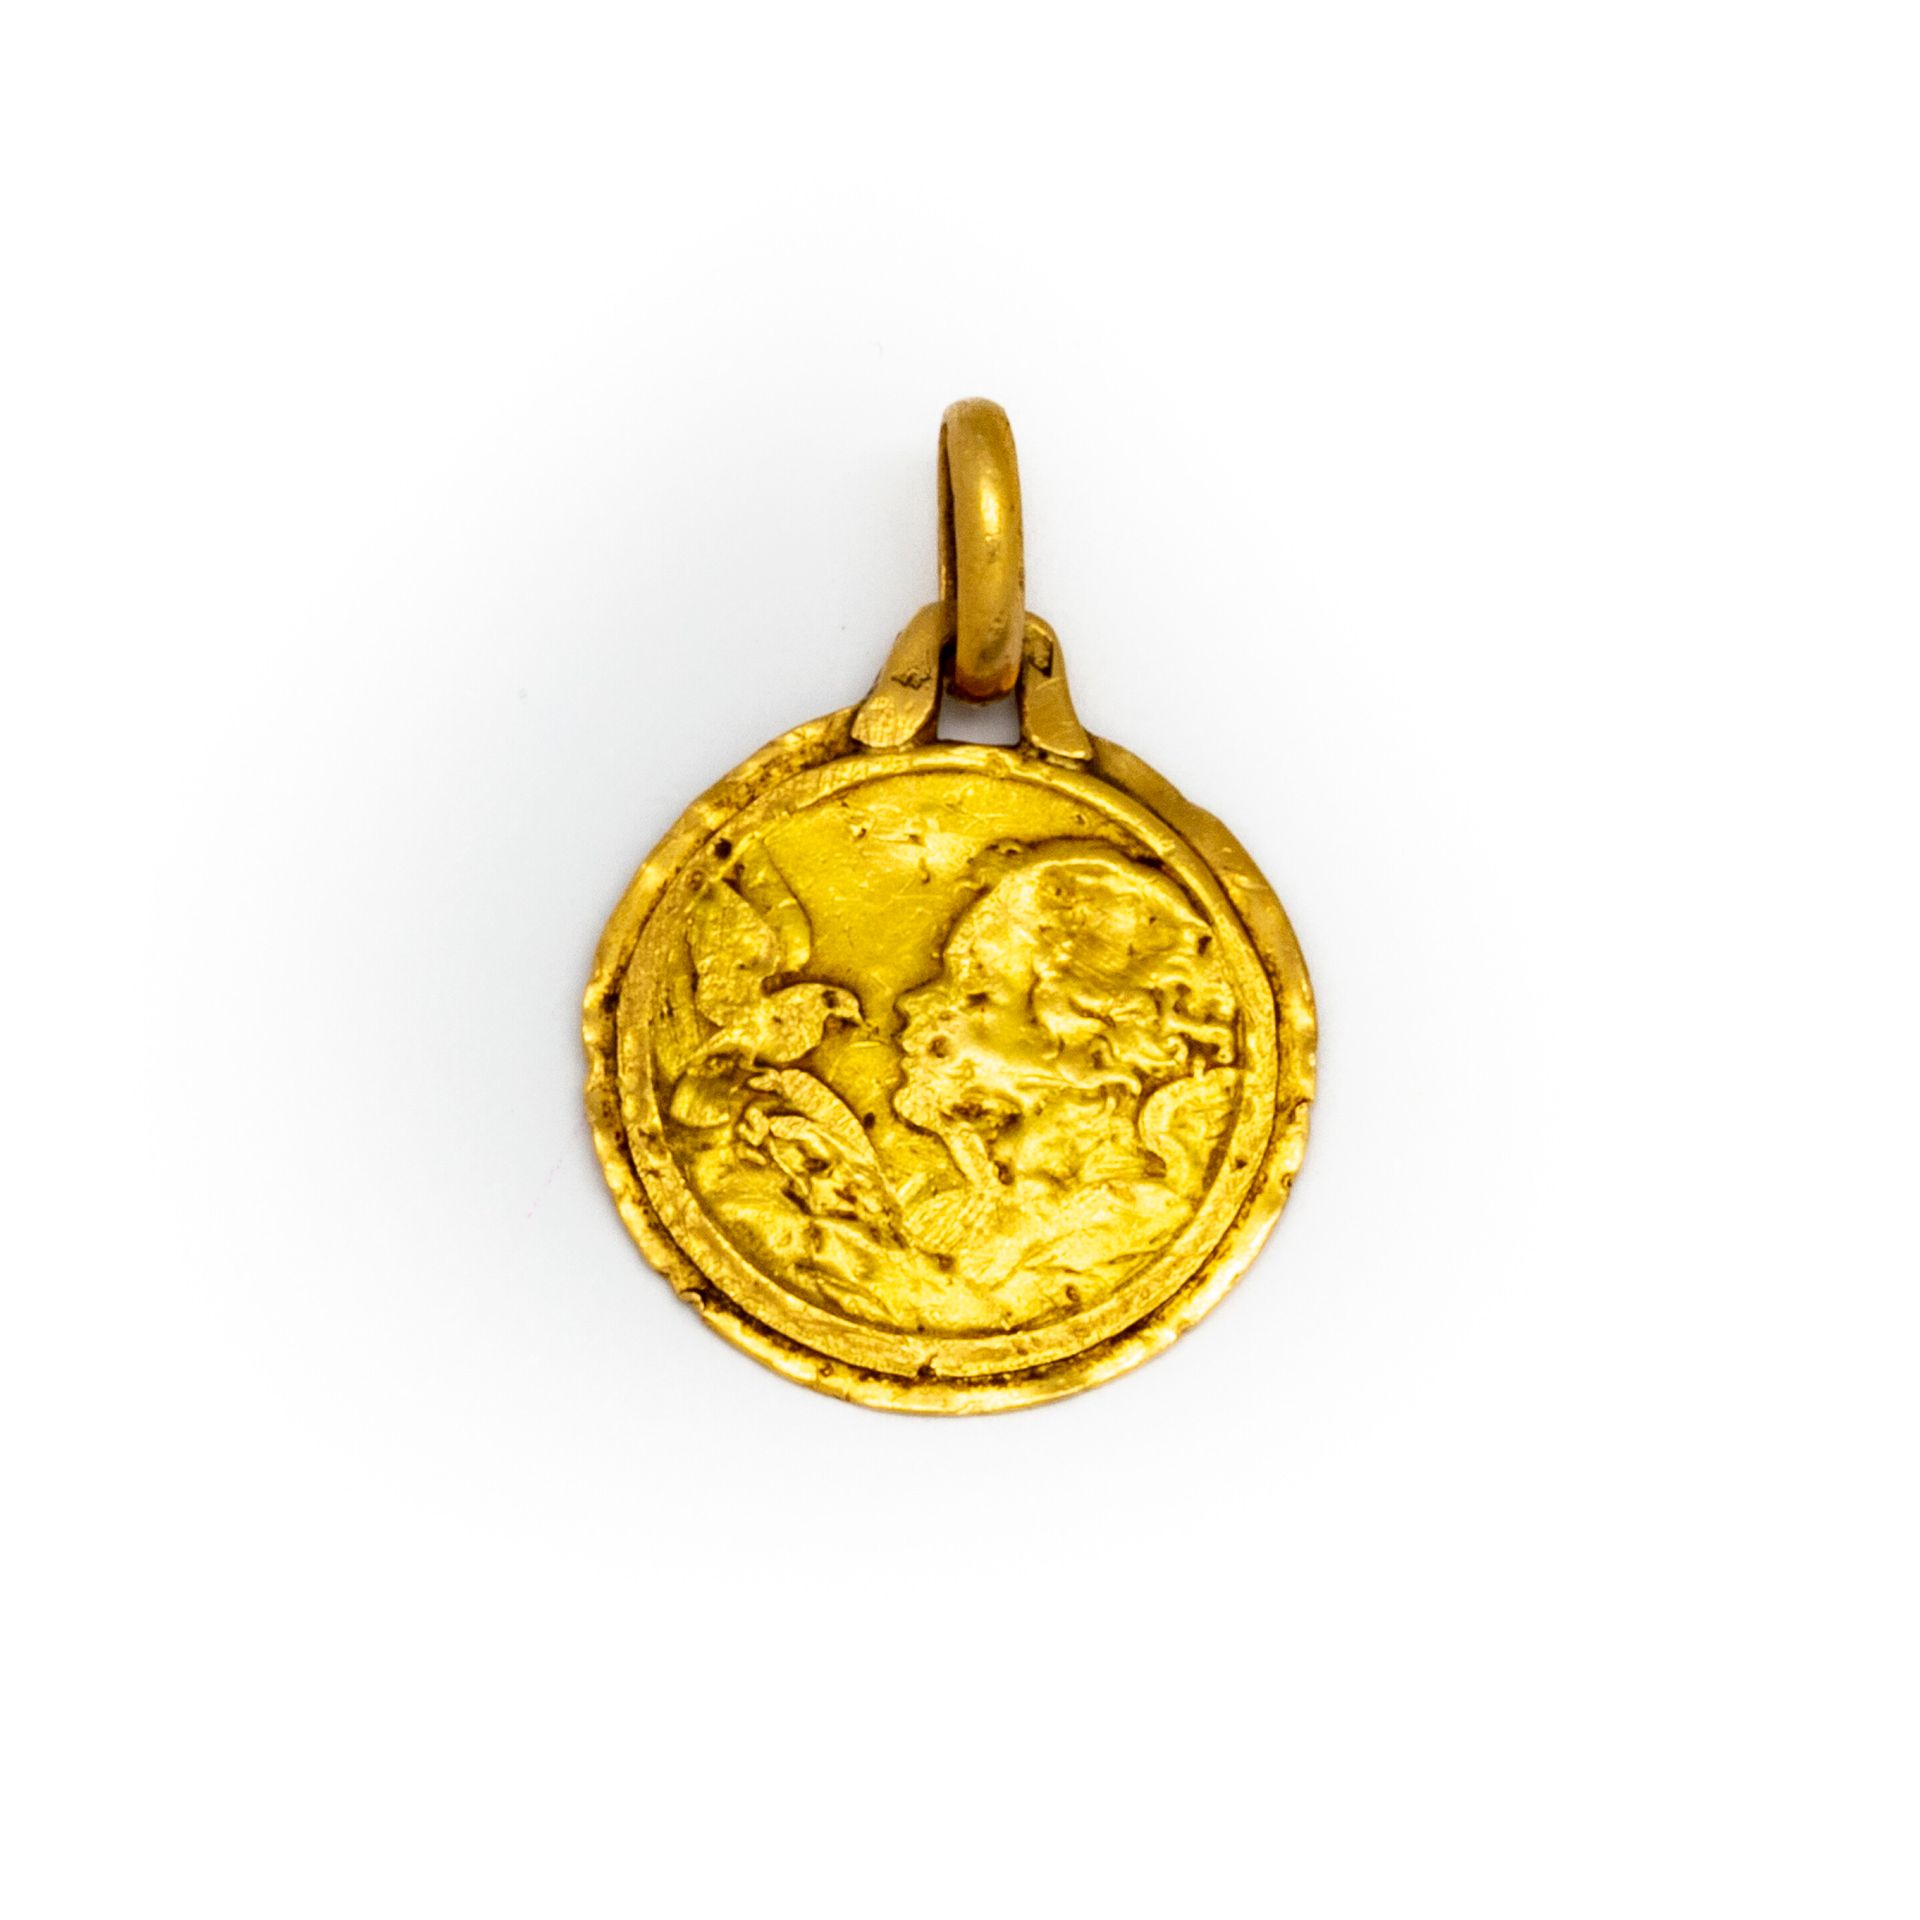 Null Yellow gold medal engraved Sylvie 
Weight : 1 g